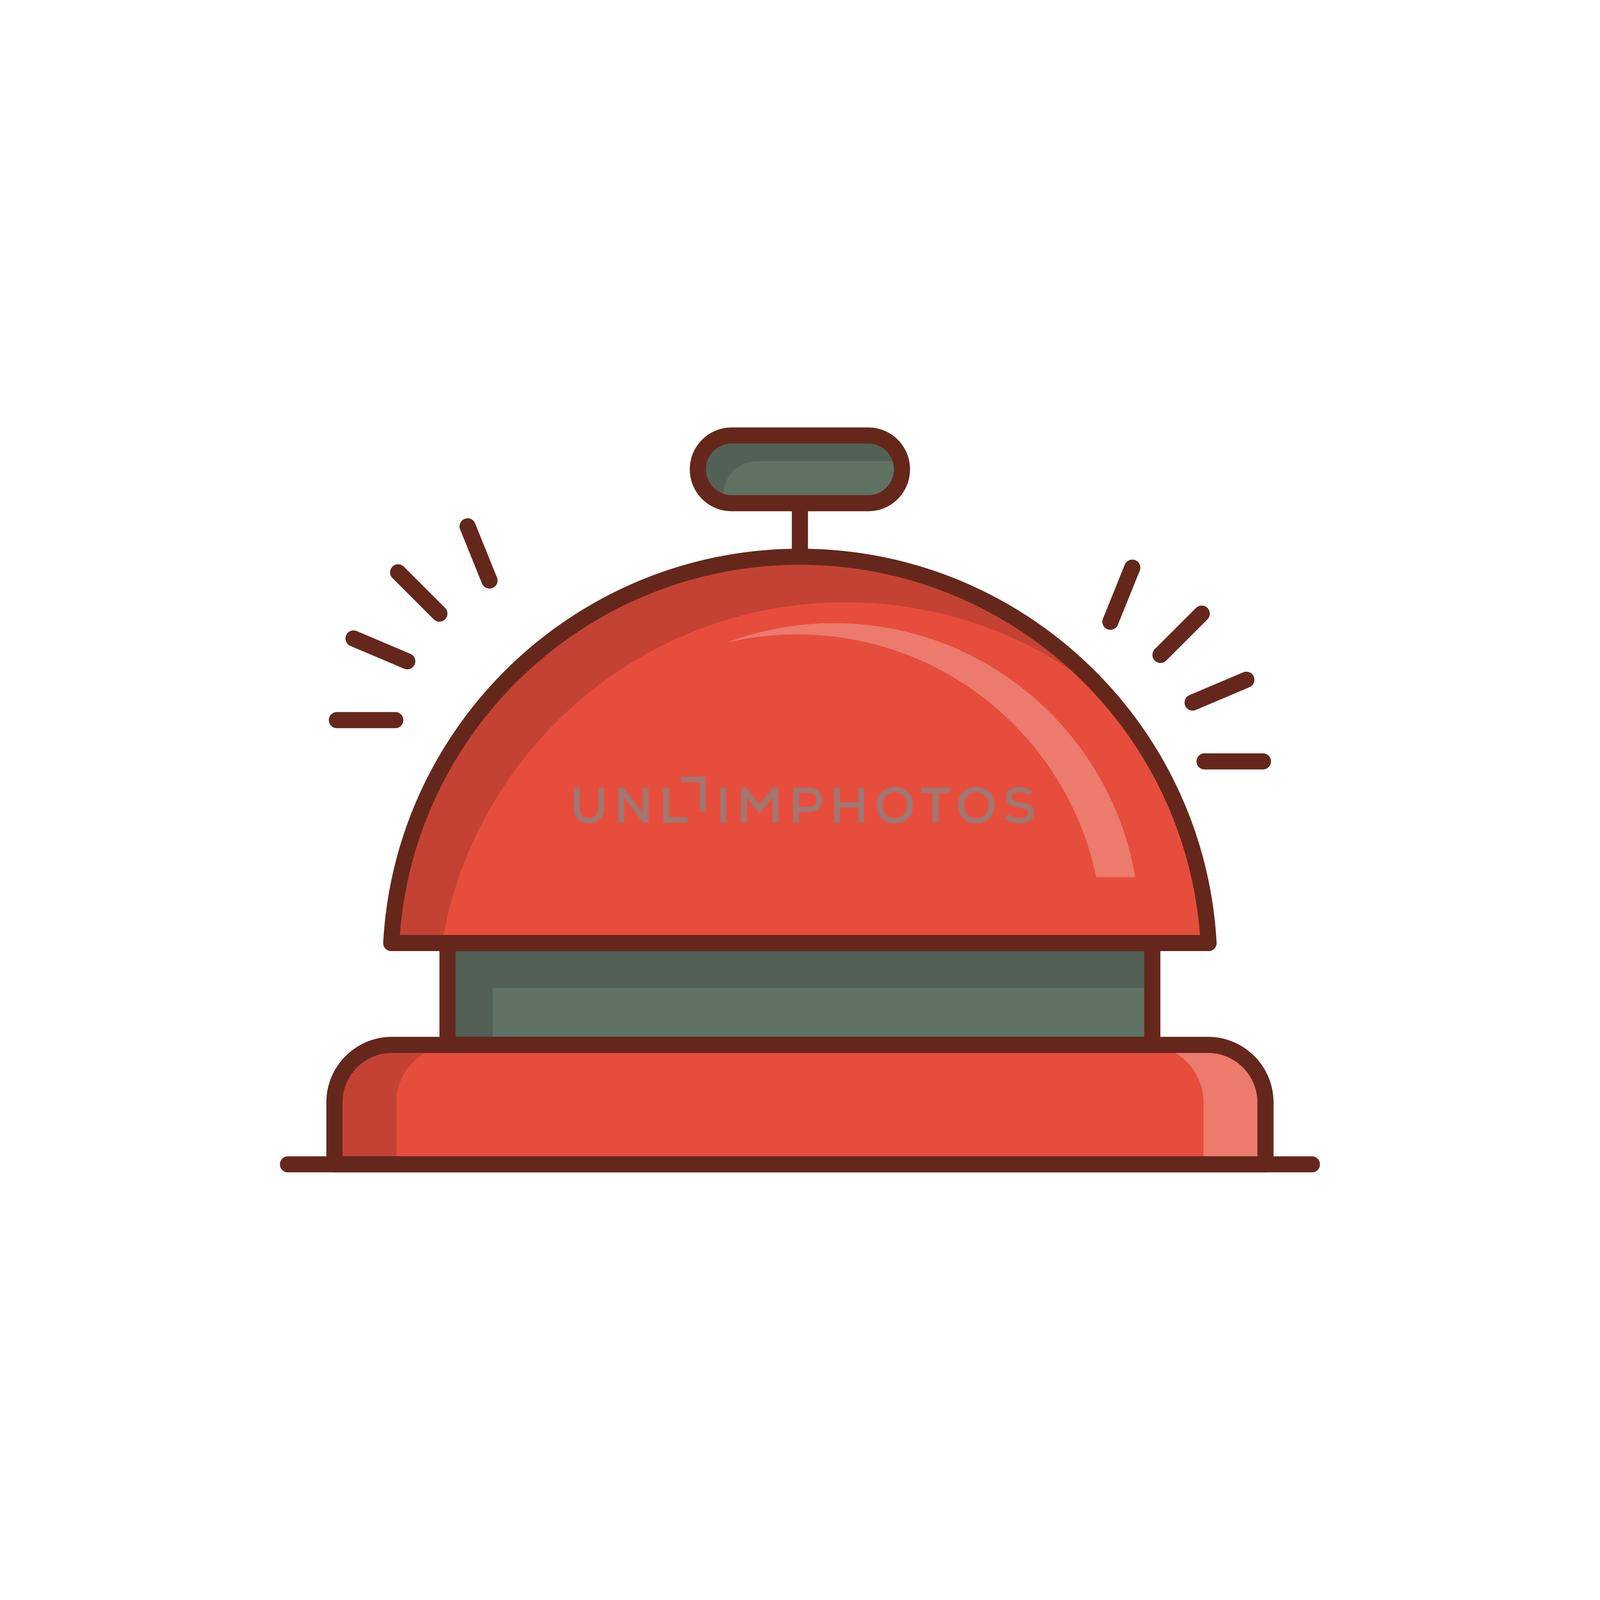 bell by FlaticonsDesign